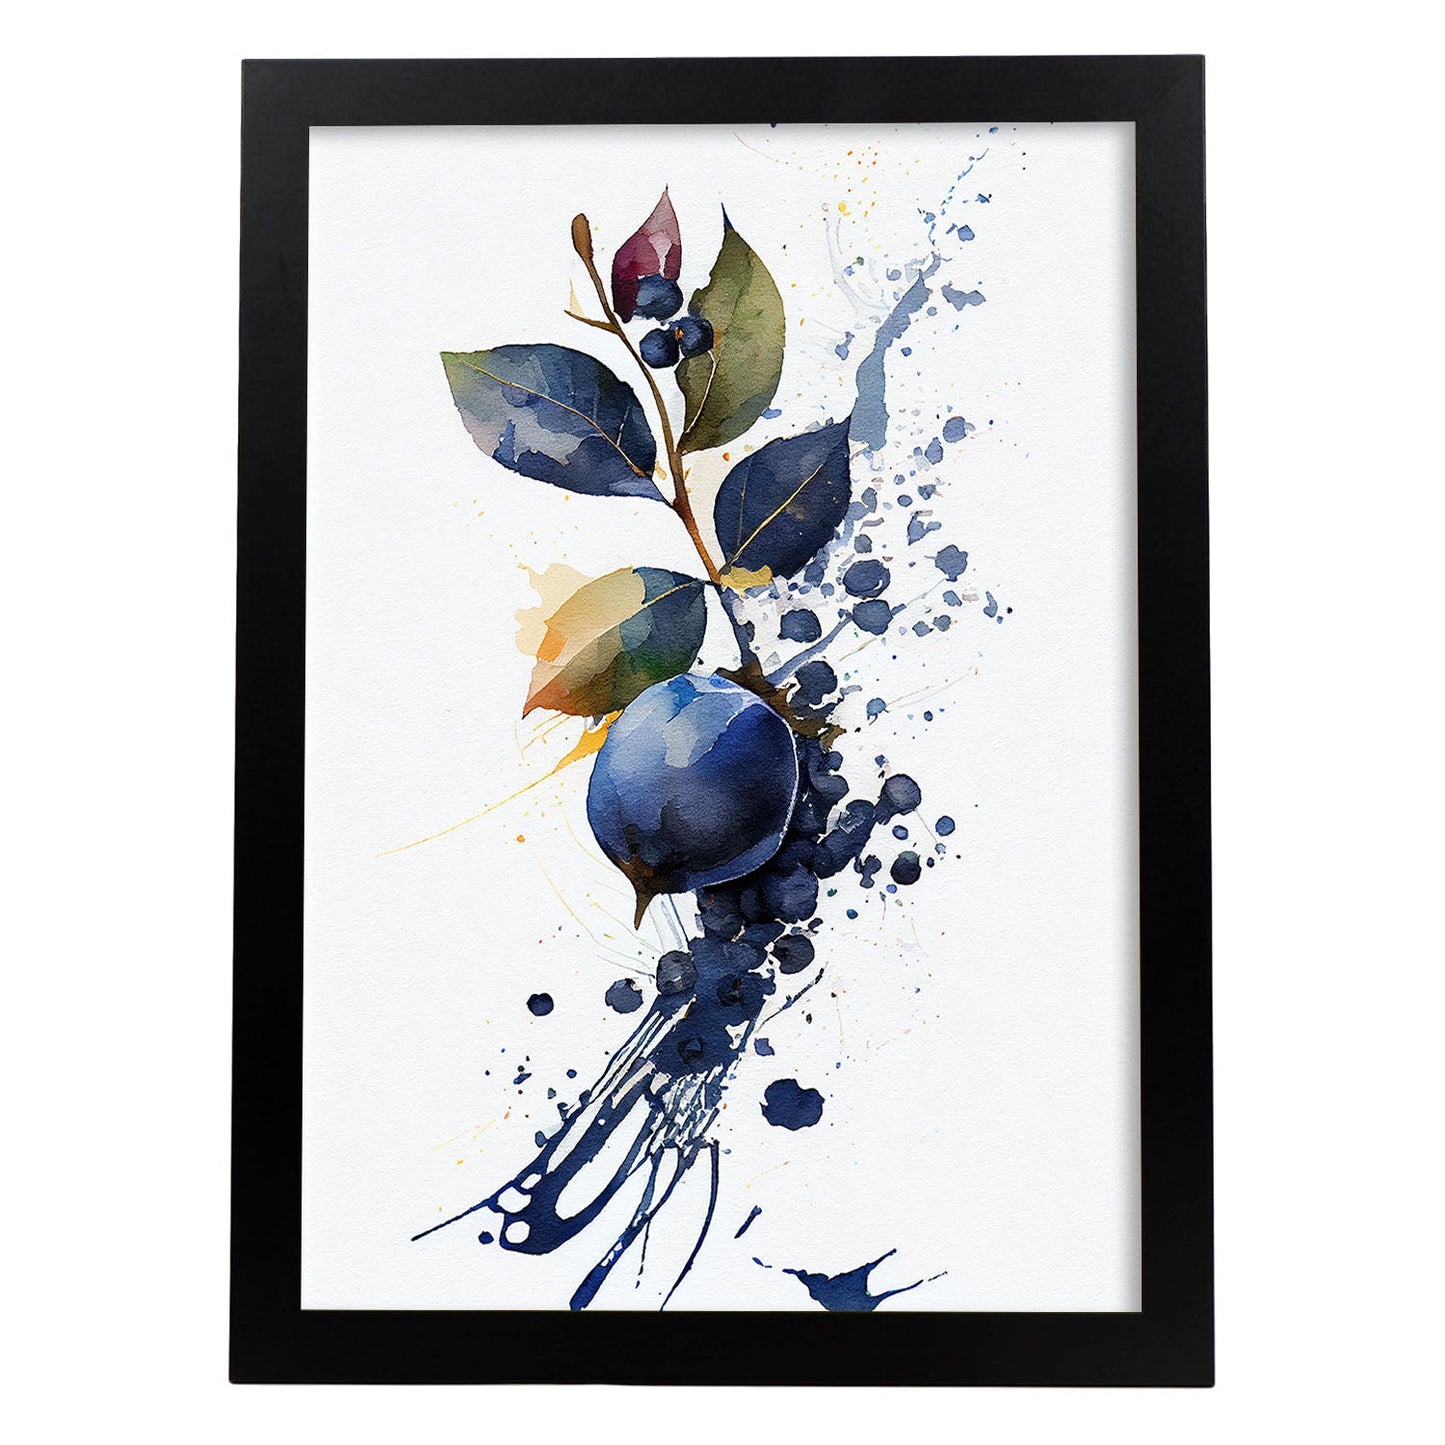 Nacnic minimalist Blueberry_1. Aesthetic Wall Art Prints for Bedroom or Living Room Design.